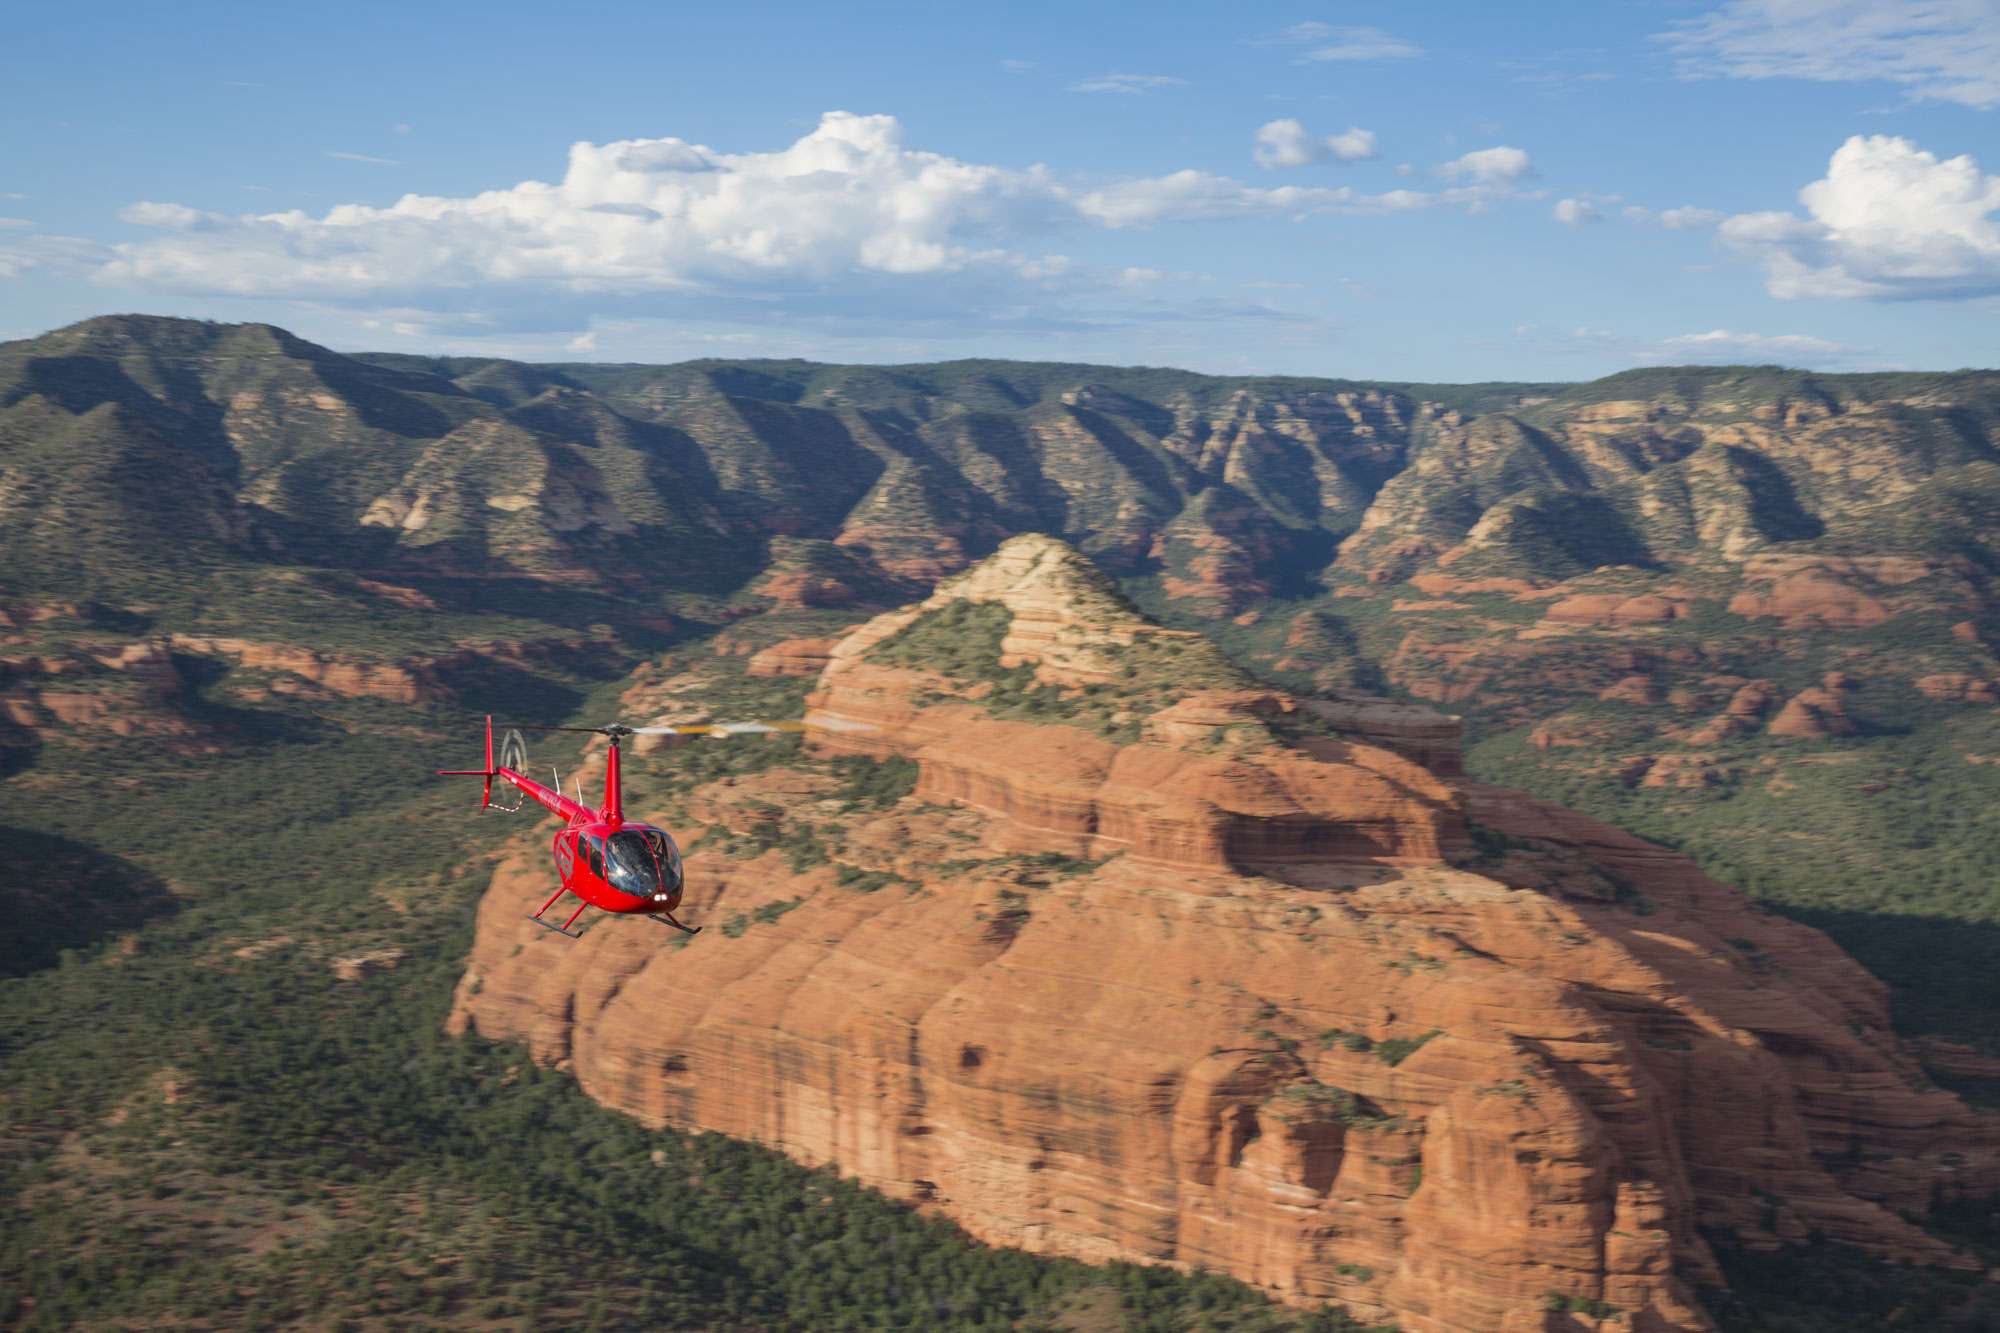 Ride the friendly Skies of Sedona in a helicopter tour 